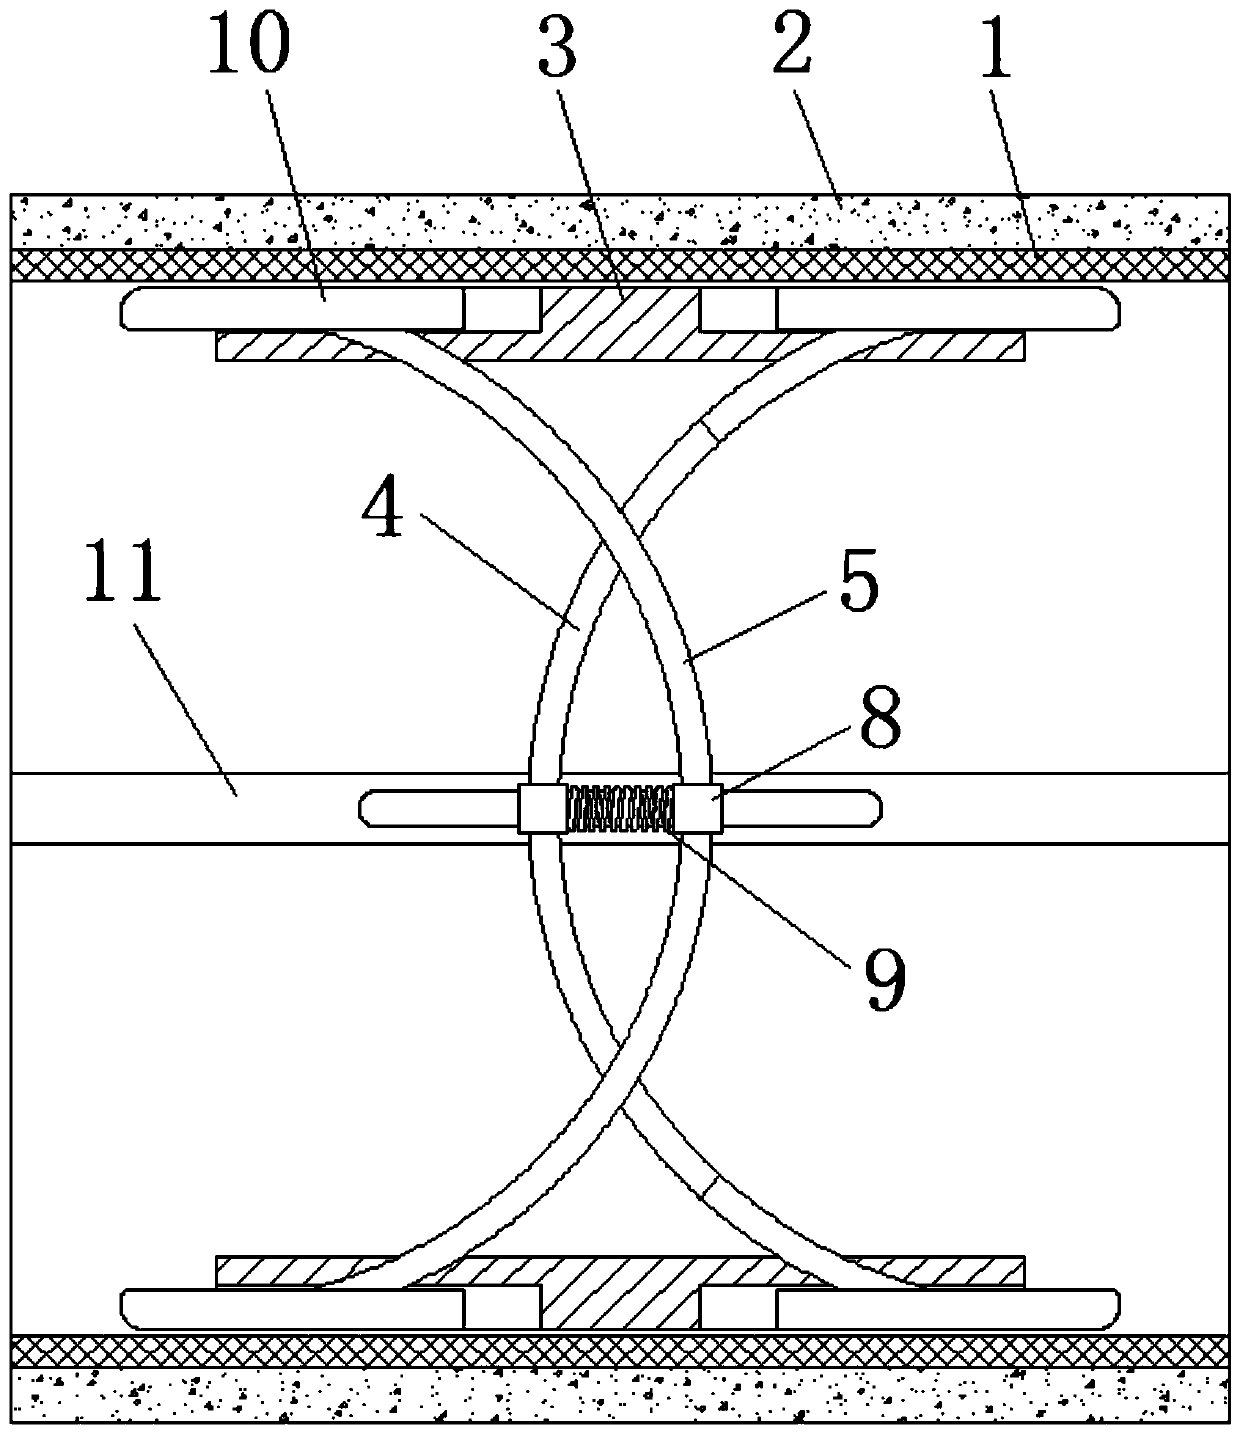 Adjustable mattress based on cross connection of elastic plates